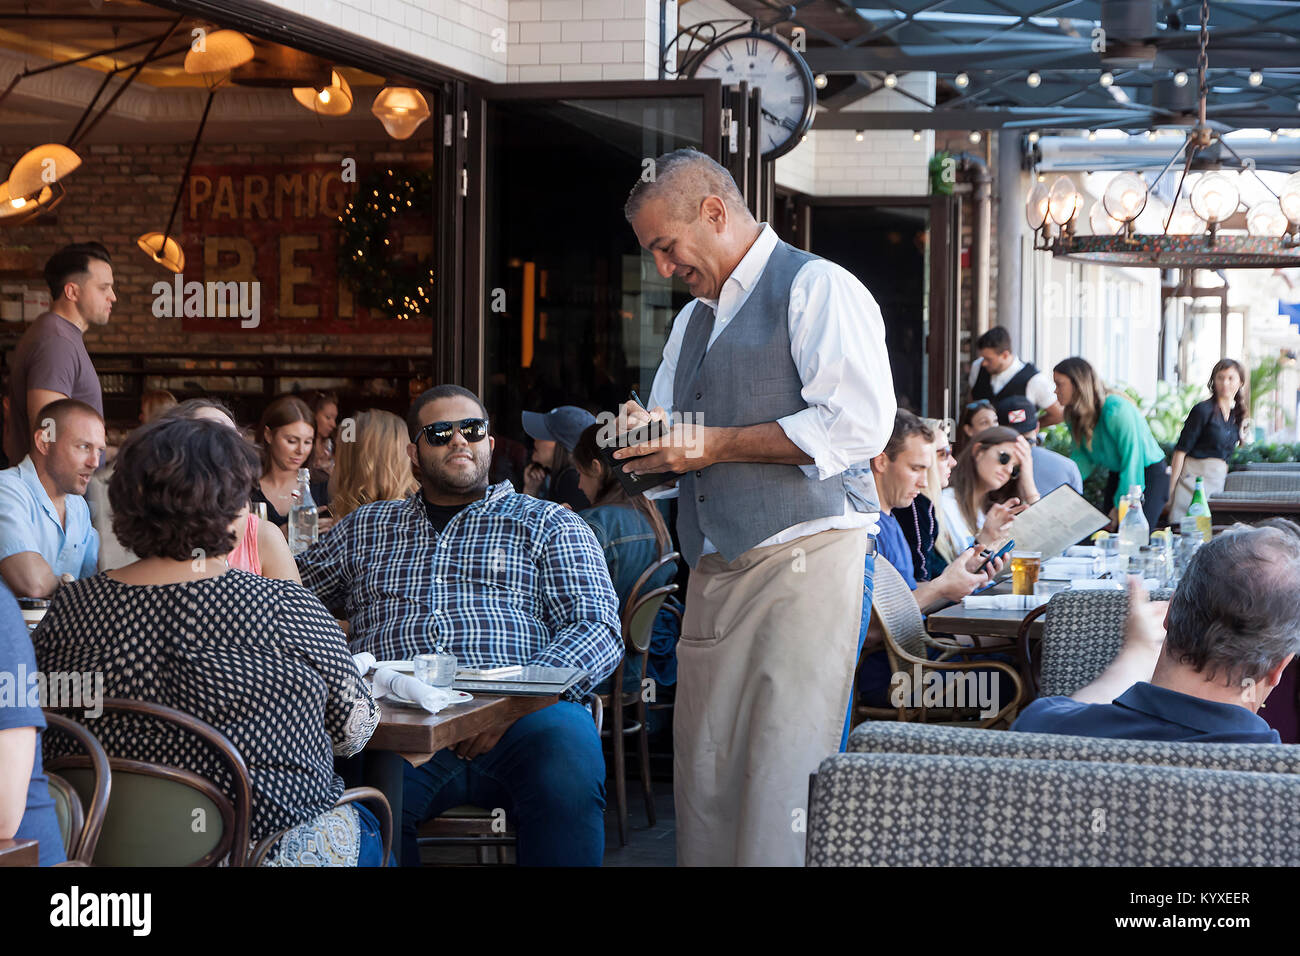 Waiter taking customer order on a notepad in a restaurant. Stock Photo